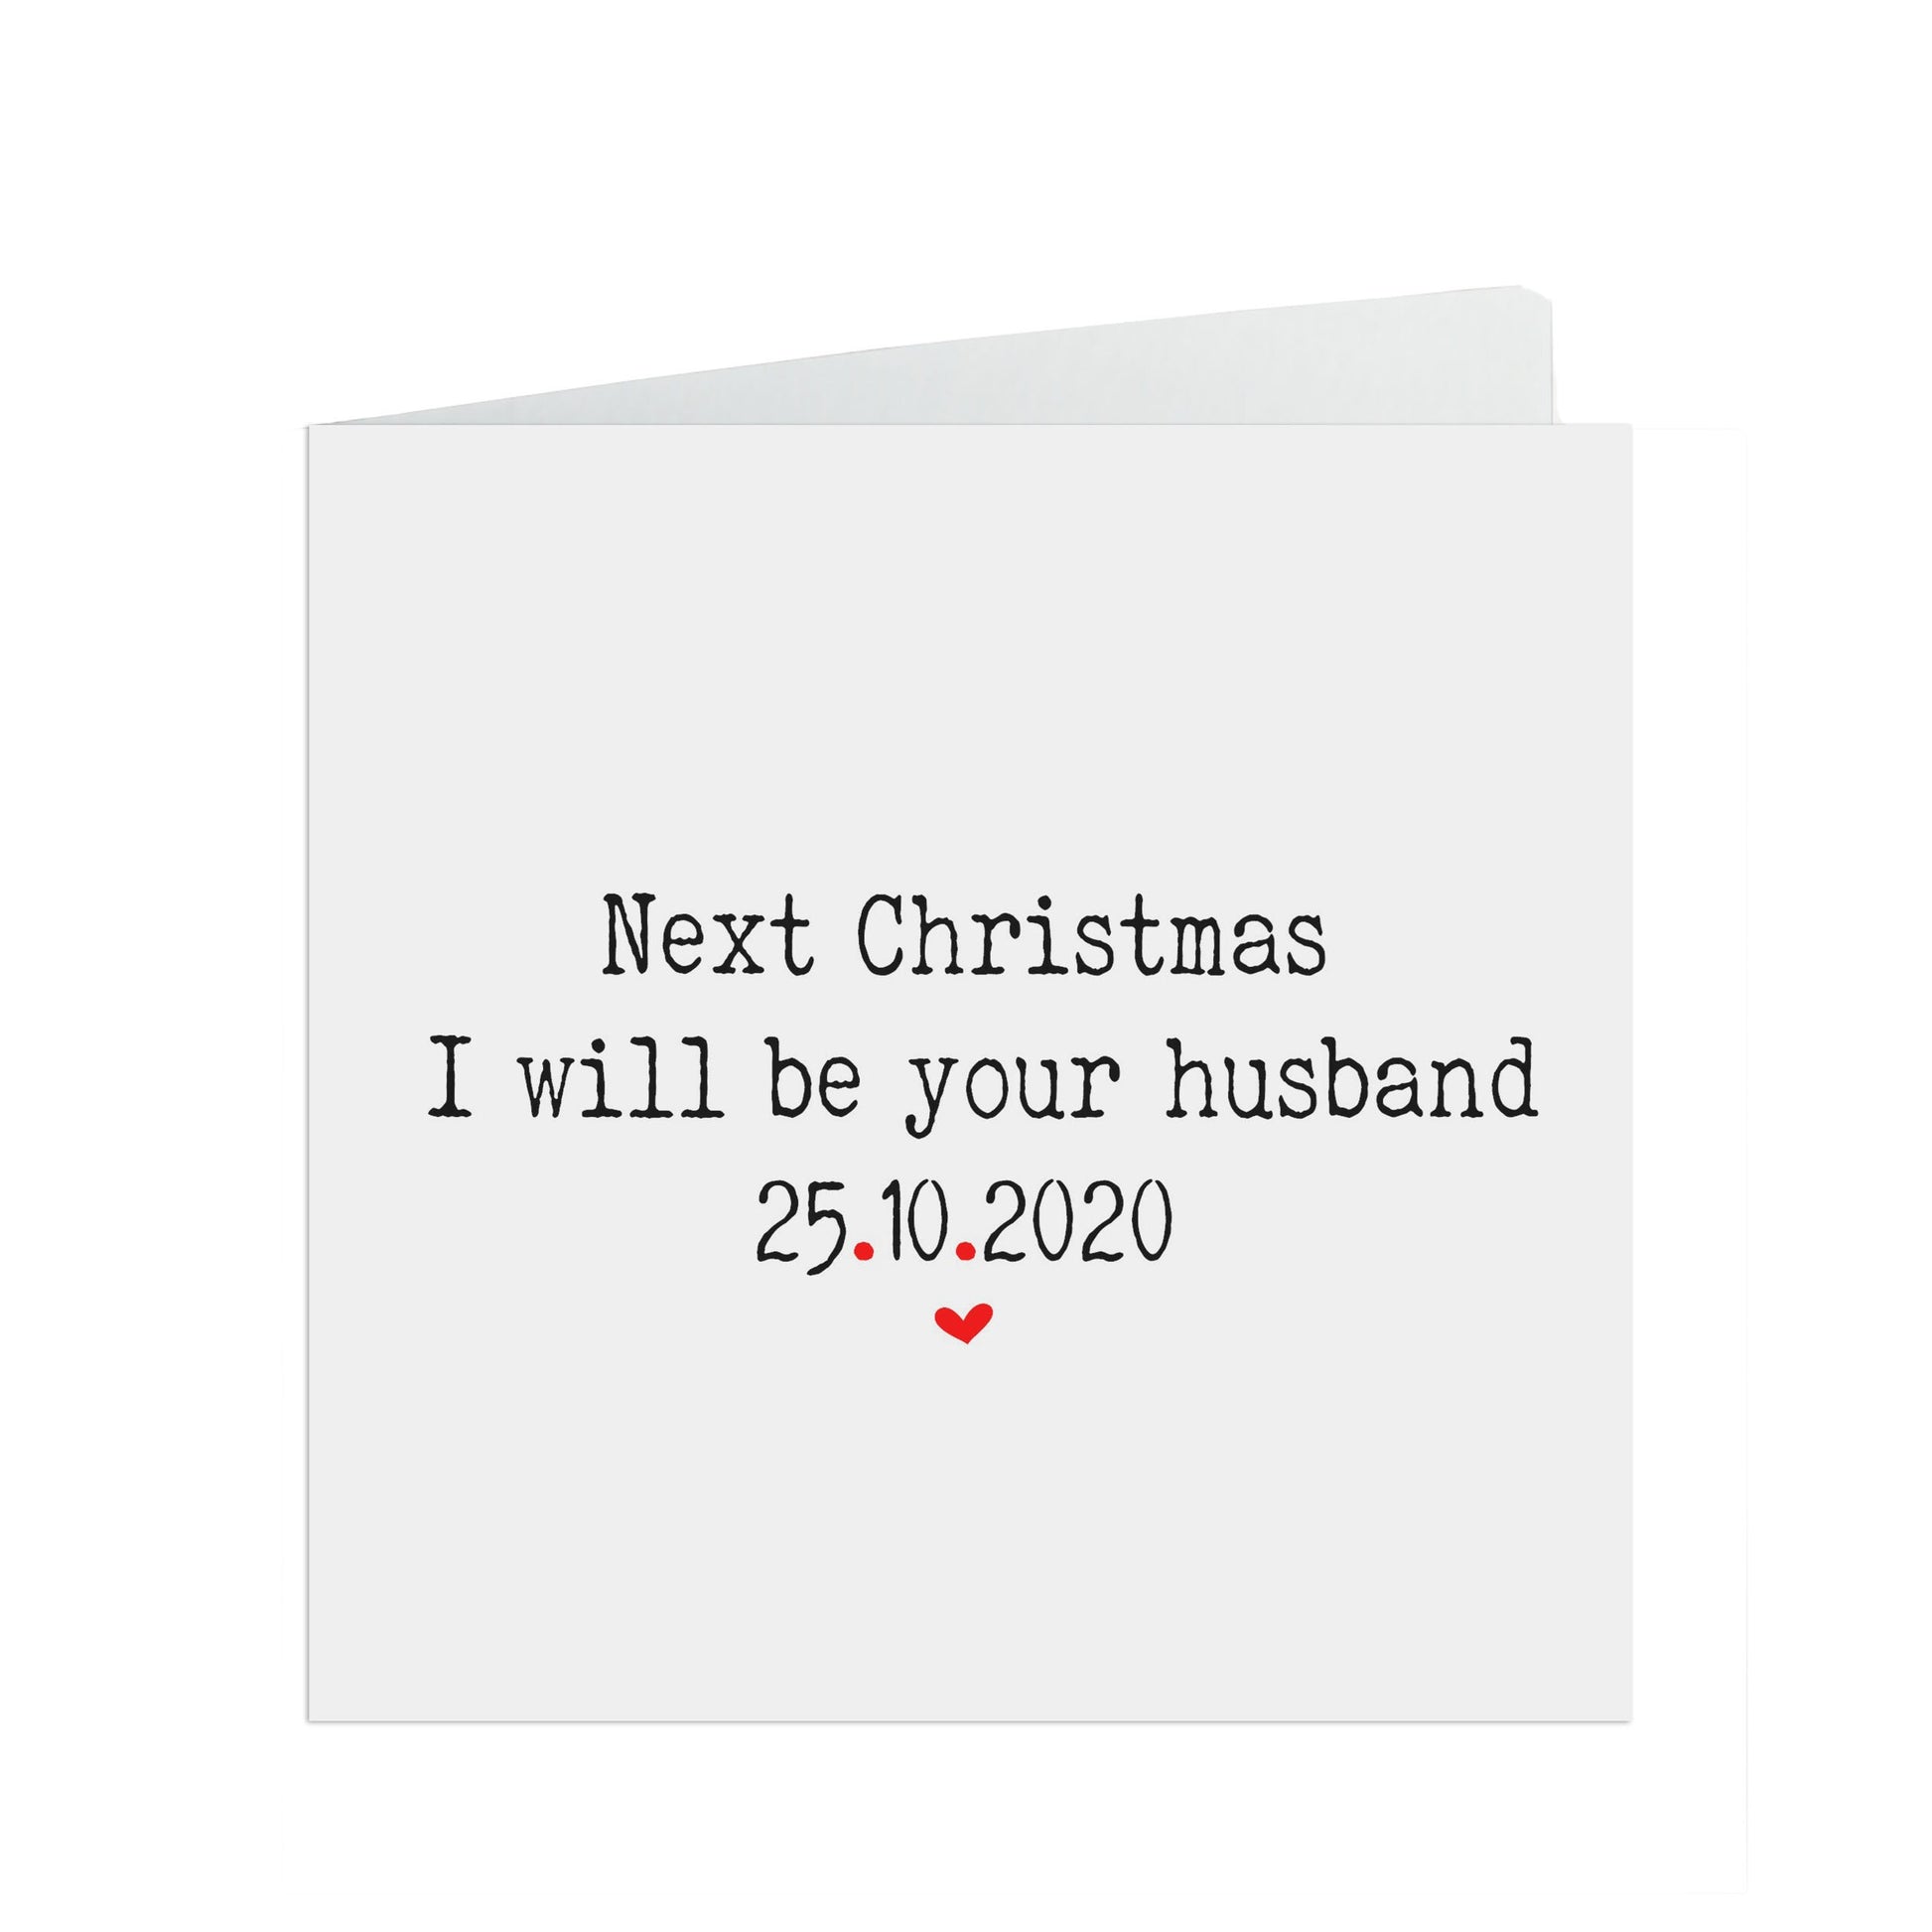 Next Christmas I Will Be Your Husband, Card Personalised With Wedding Date